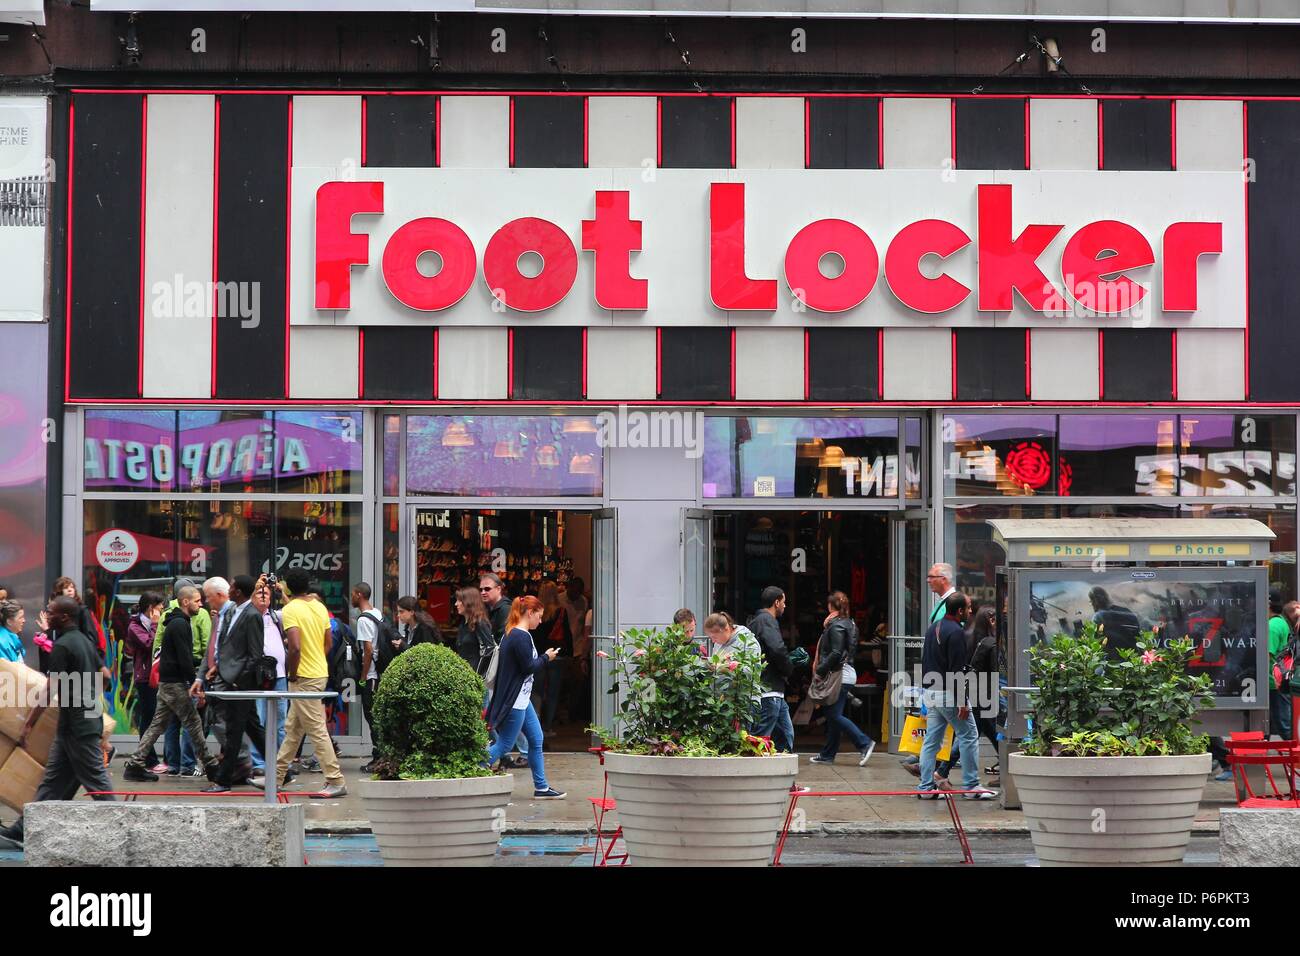 NEW YORK - JUNE 10: People visit Foot Locker store on June 10, 2013 in New York. With almost 4000 stores it is the largest athletic footwear chain. It Stock Photo